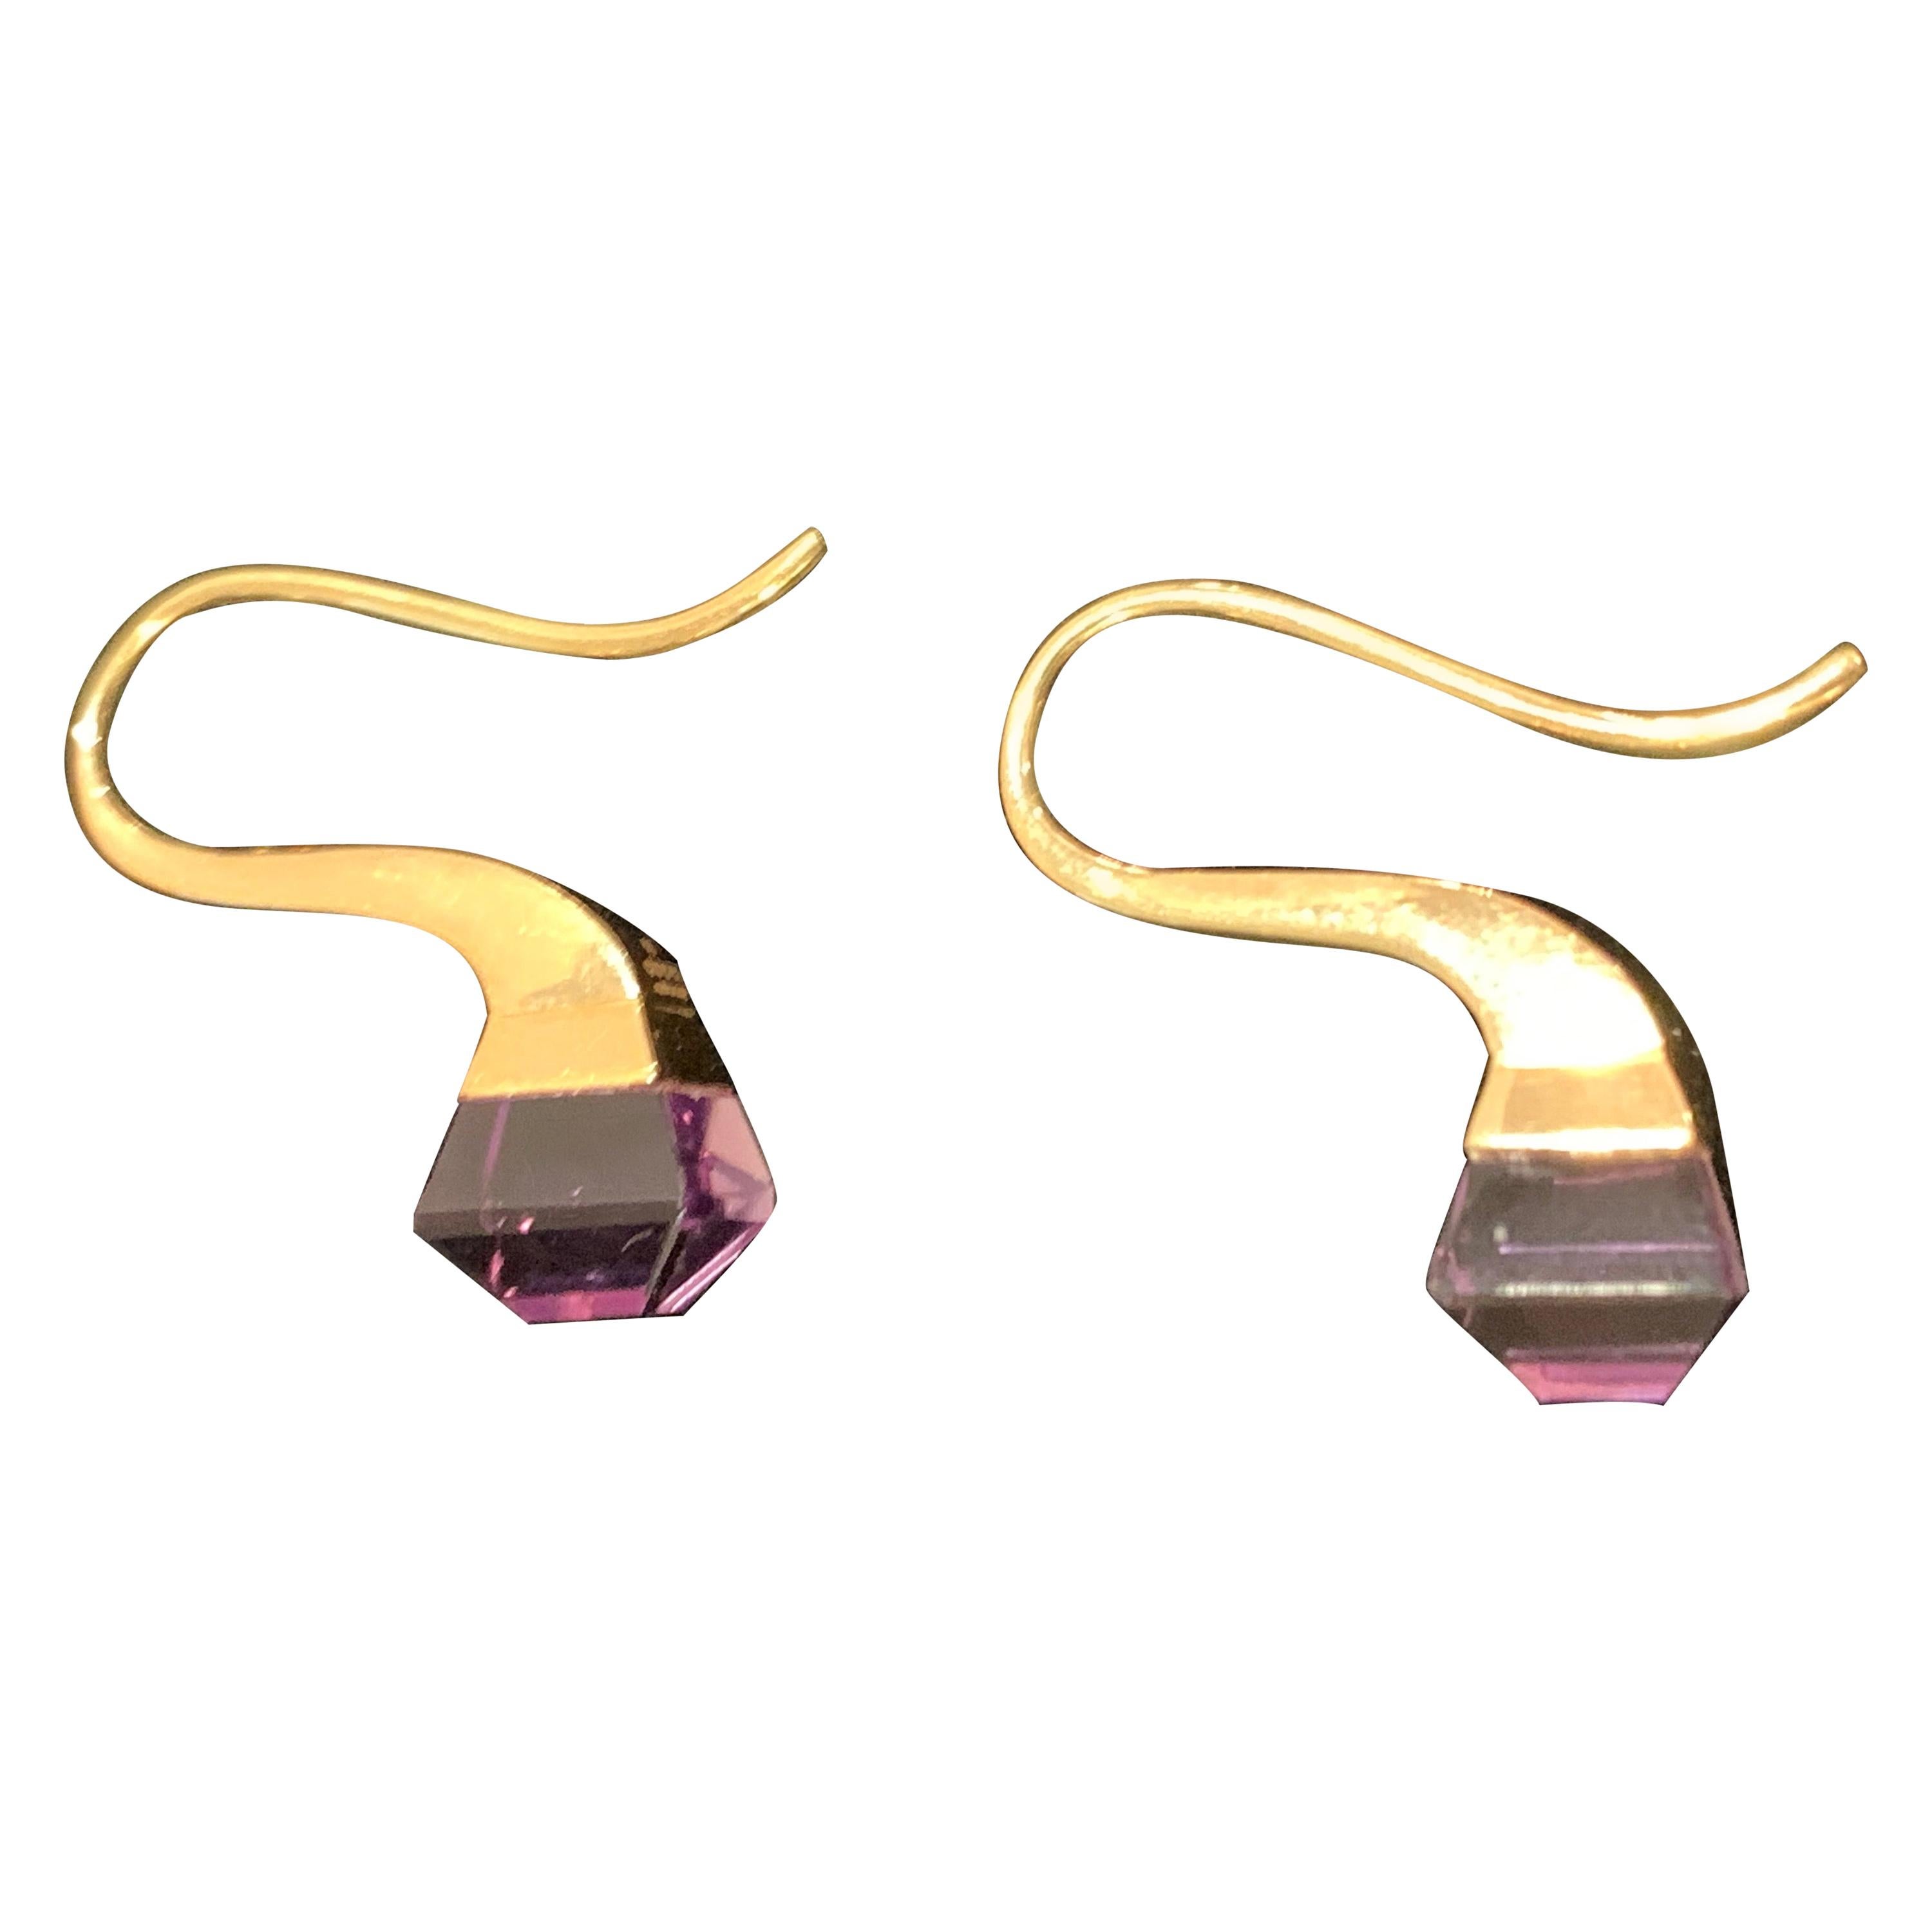 Gucci French Horn Earrings 18-Karat Gold with Amethyst